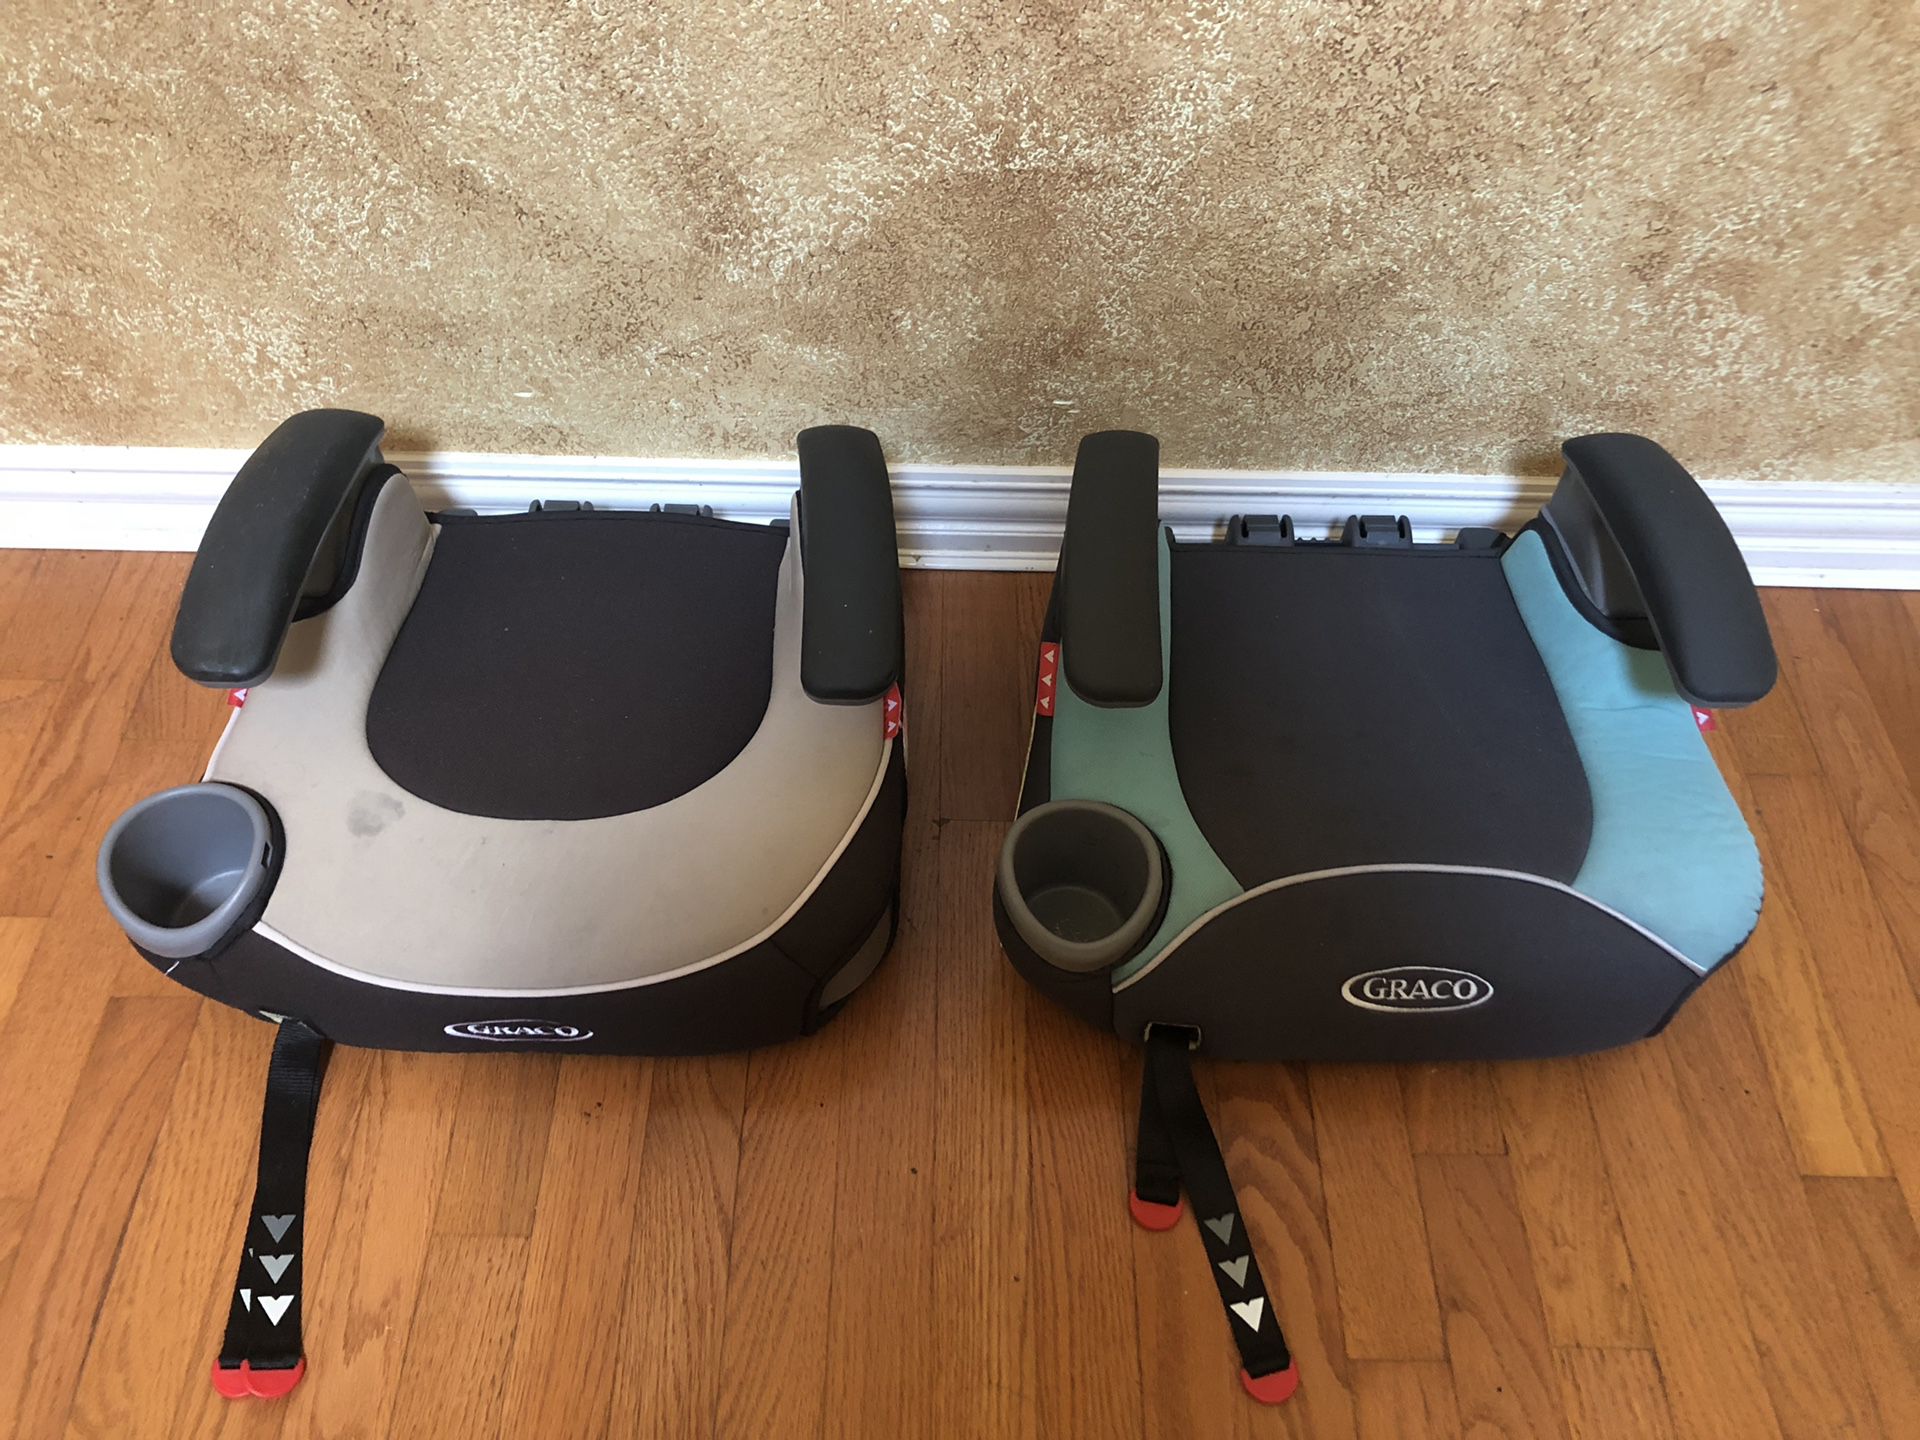 Graco car seat boosters